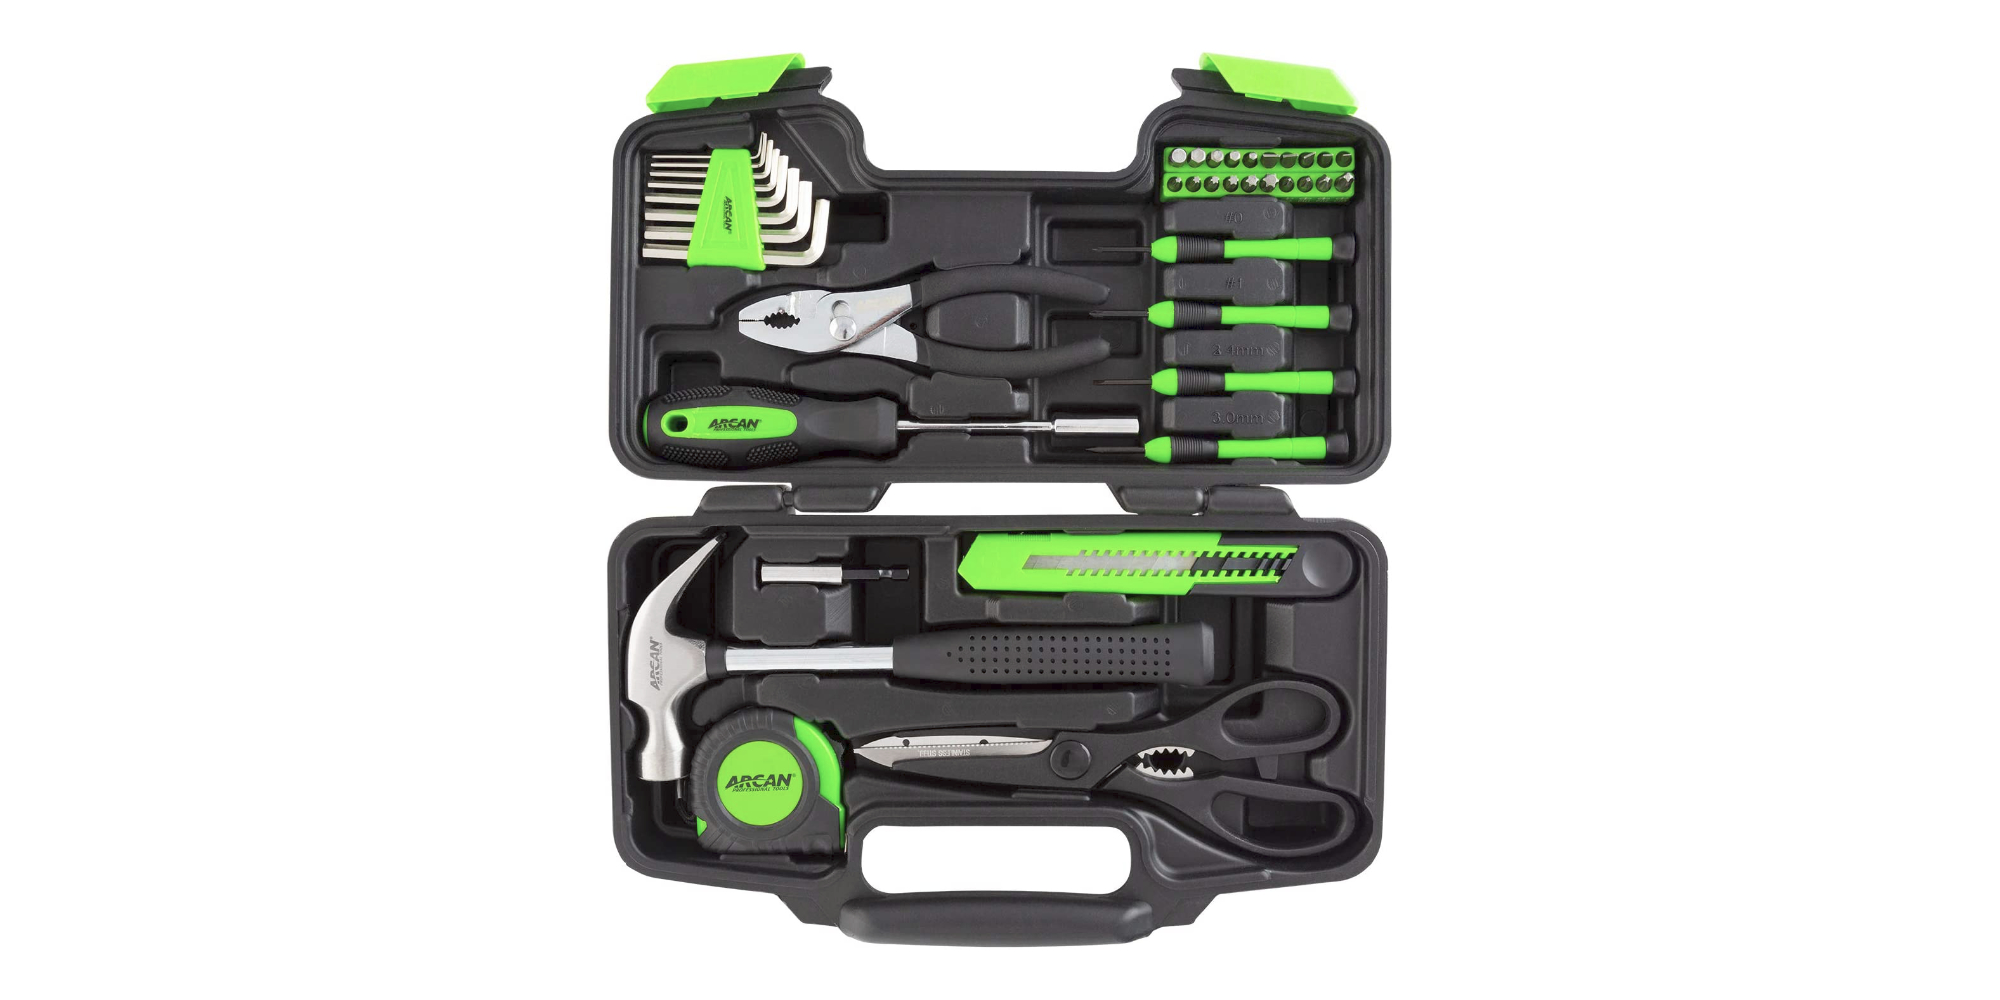 Don't overlook this highly-rated 39-piece hand tool kit at $15 Prime  shipped (Amazon low)